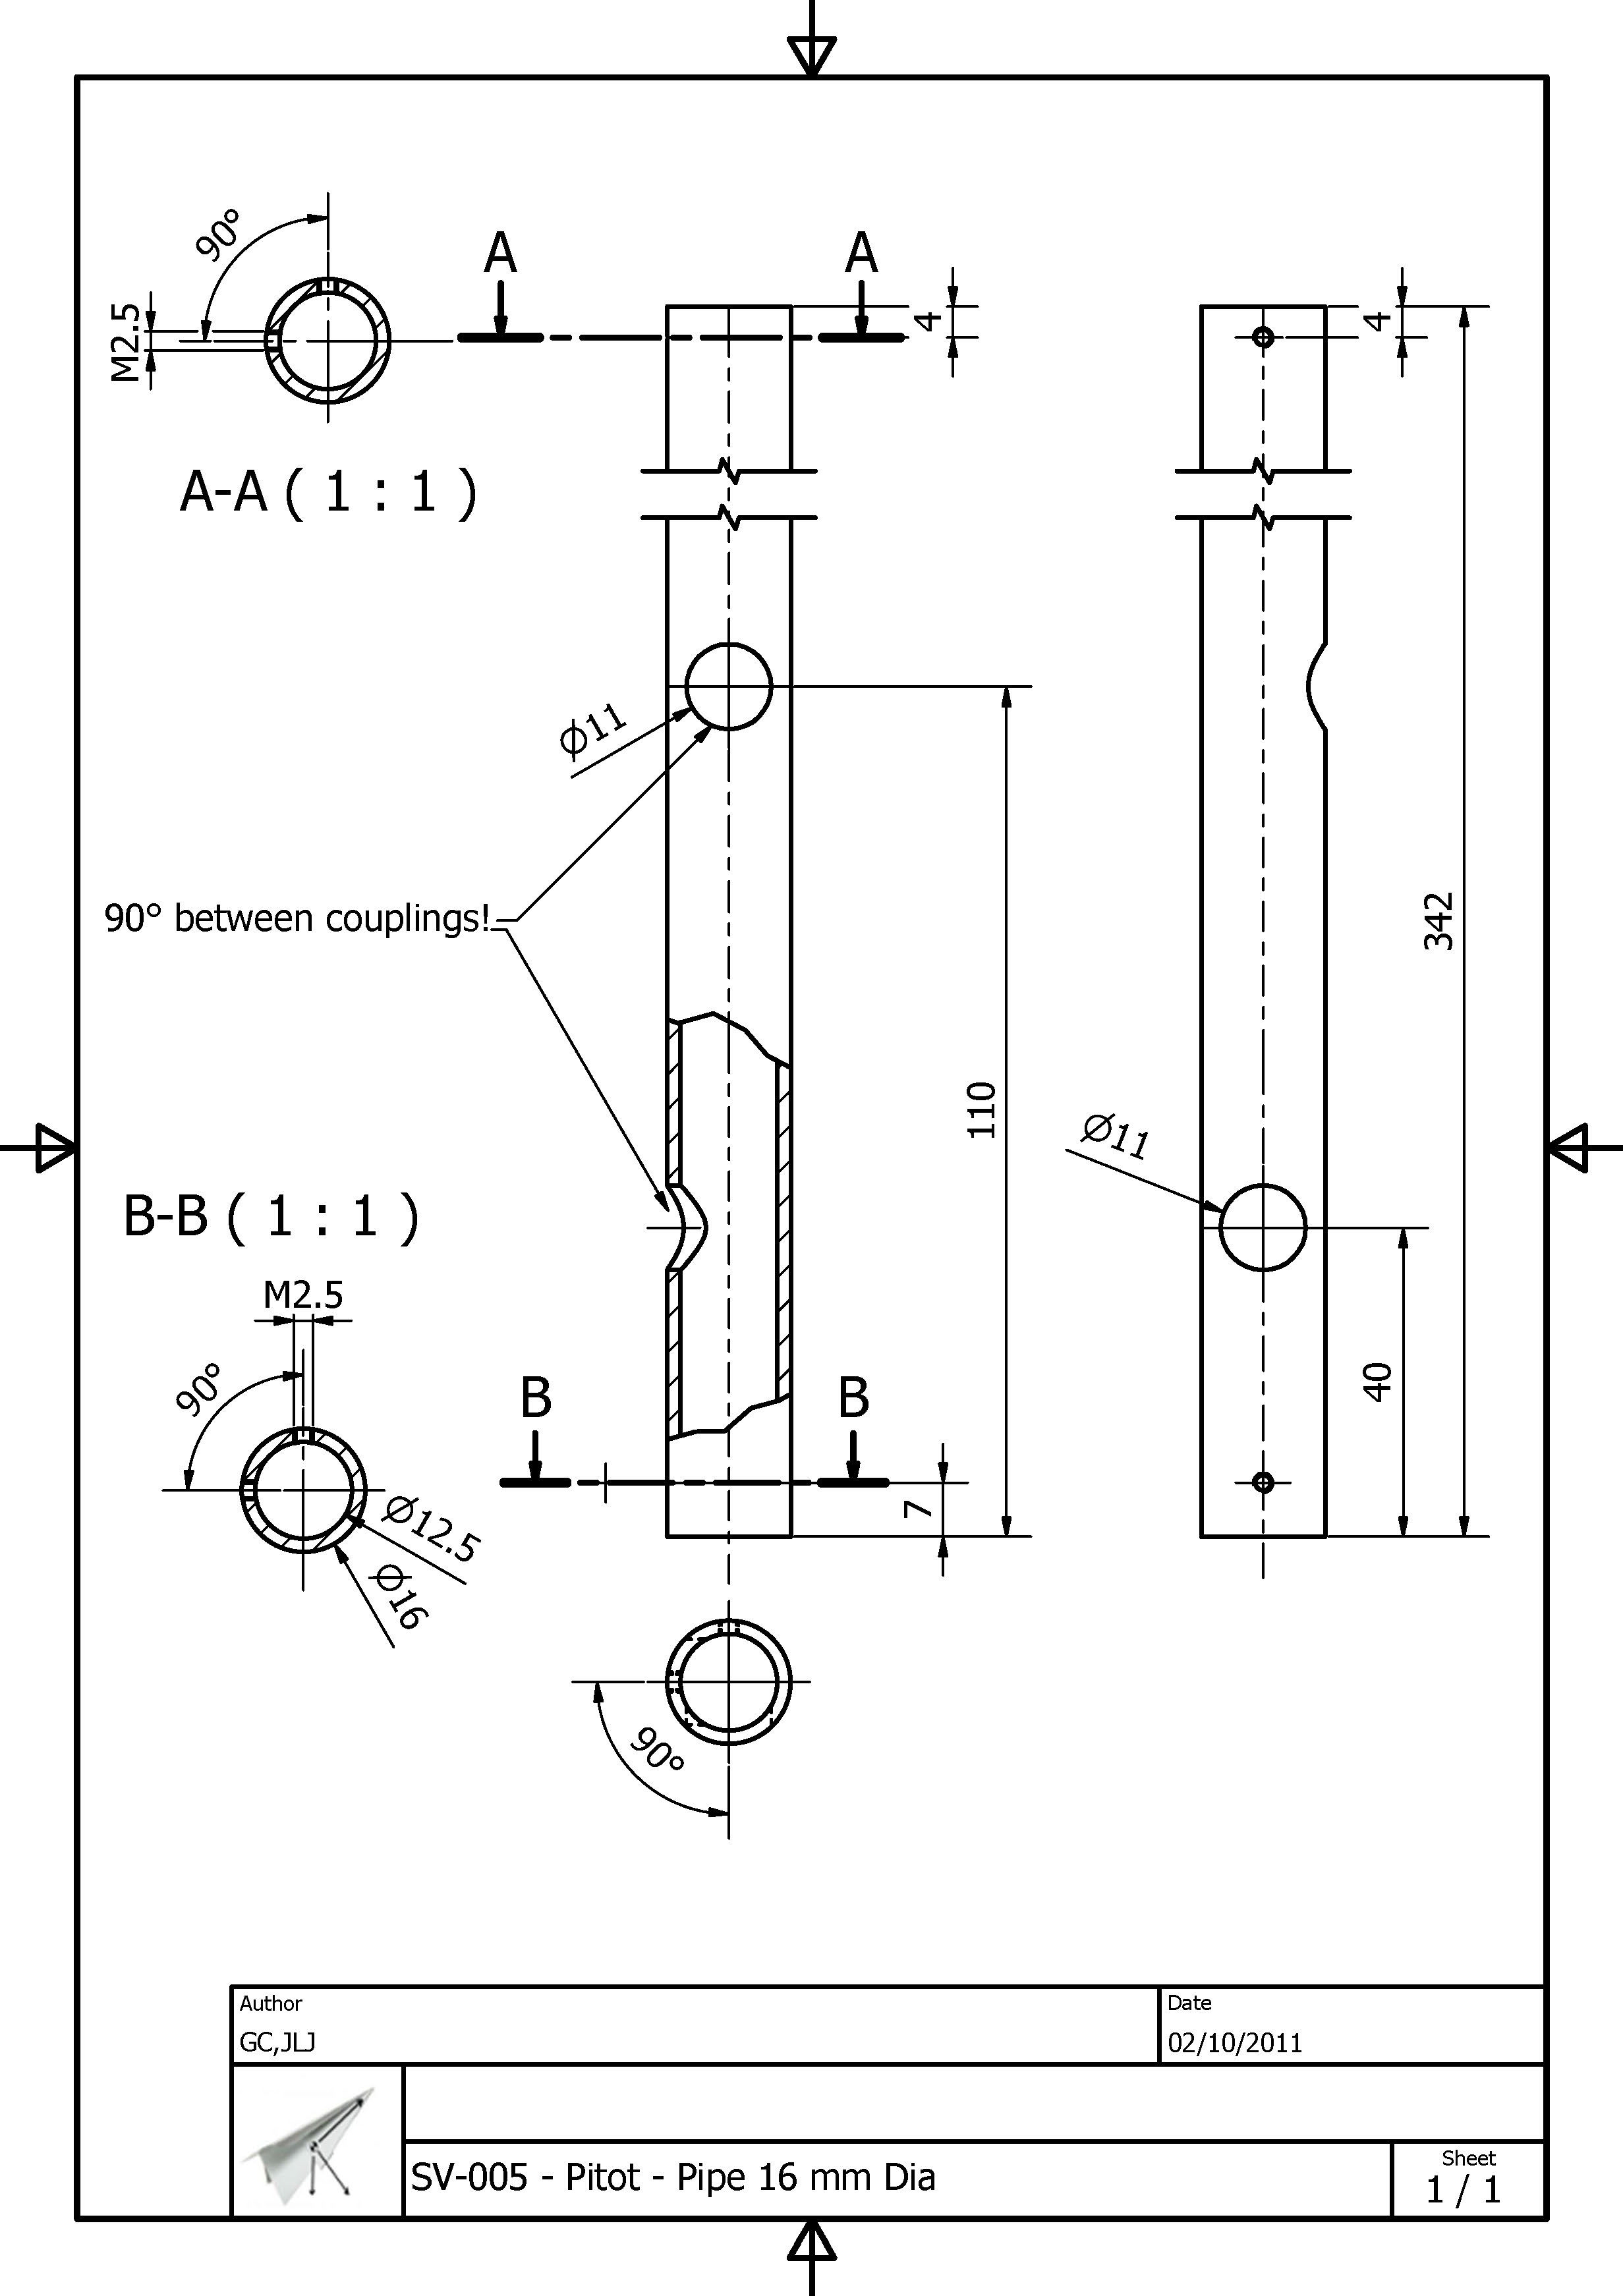 Details drawings regarding angle of attack vane are available here .